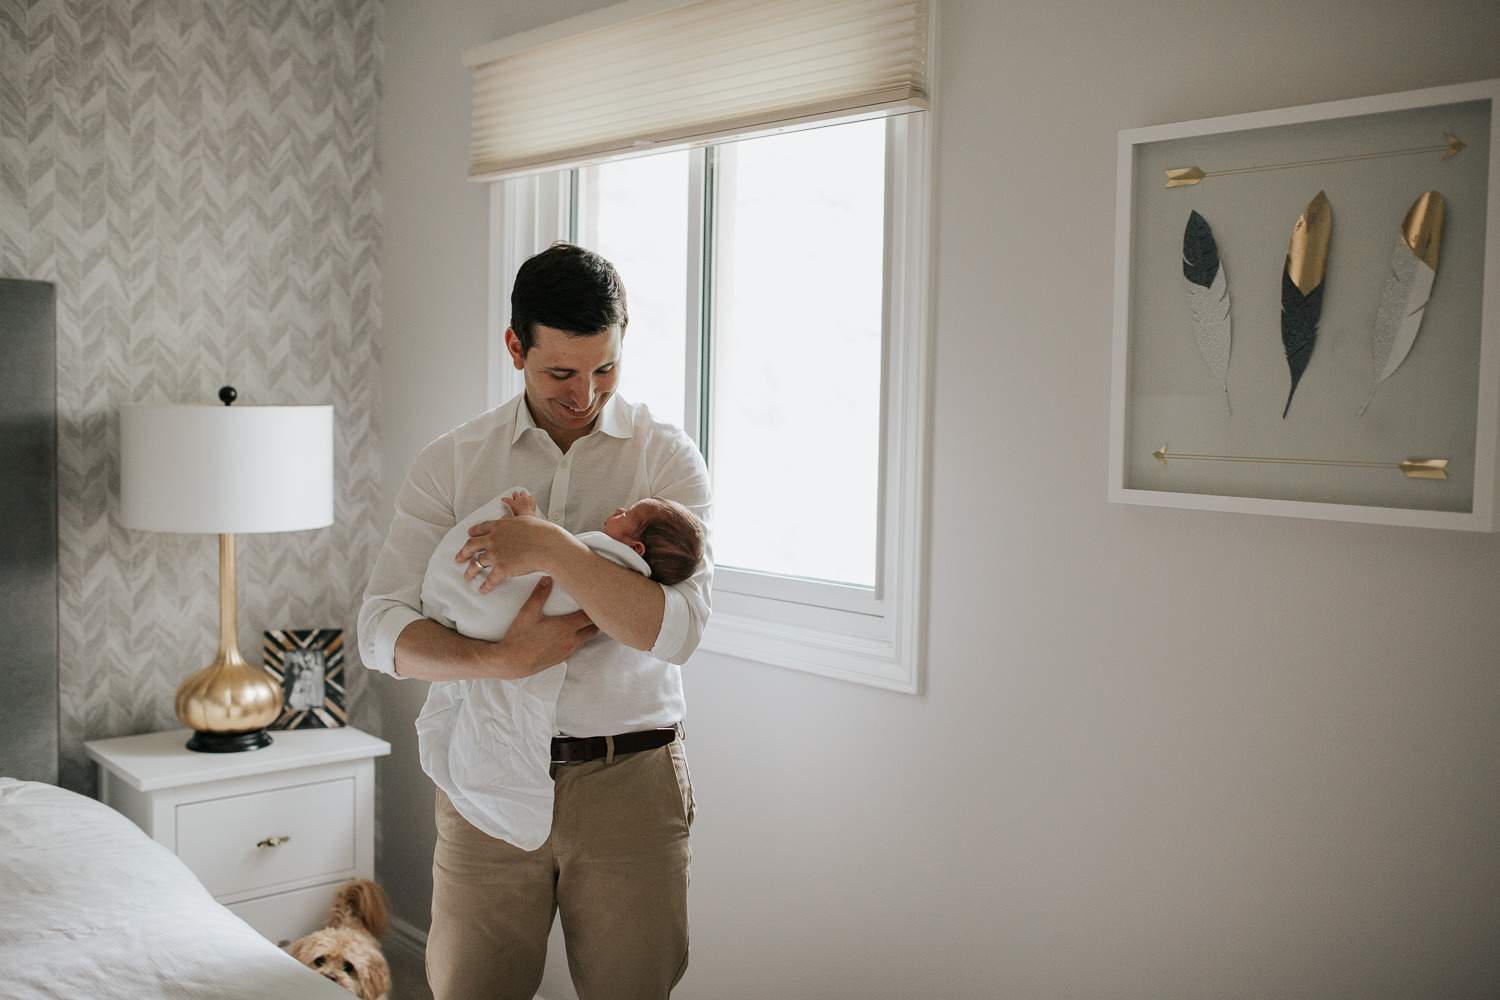 new dad standing next to bed in master bedroom holding 2 week old baby boy in white swaddle, rocking him to sleep - GTA Lifestyle Photography